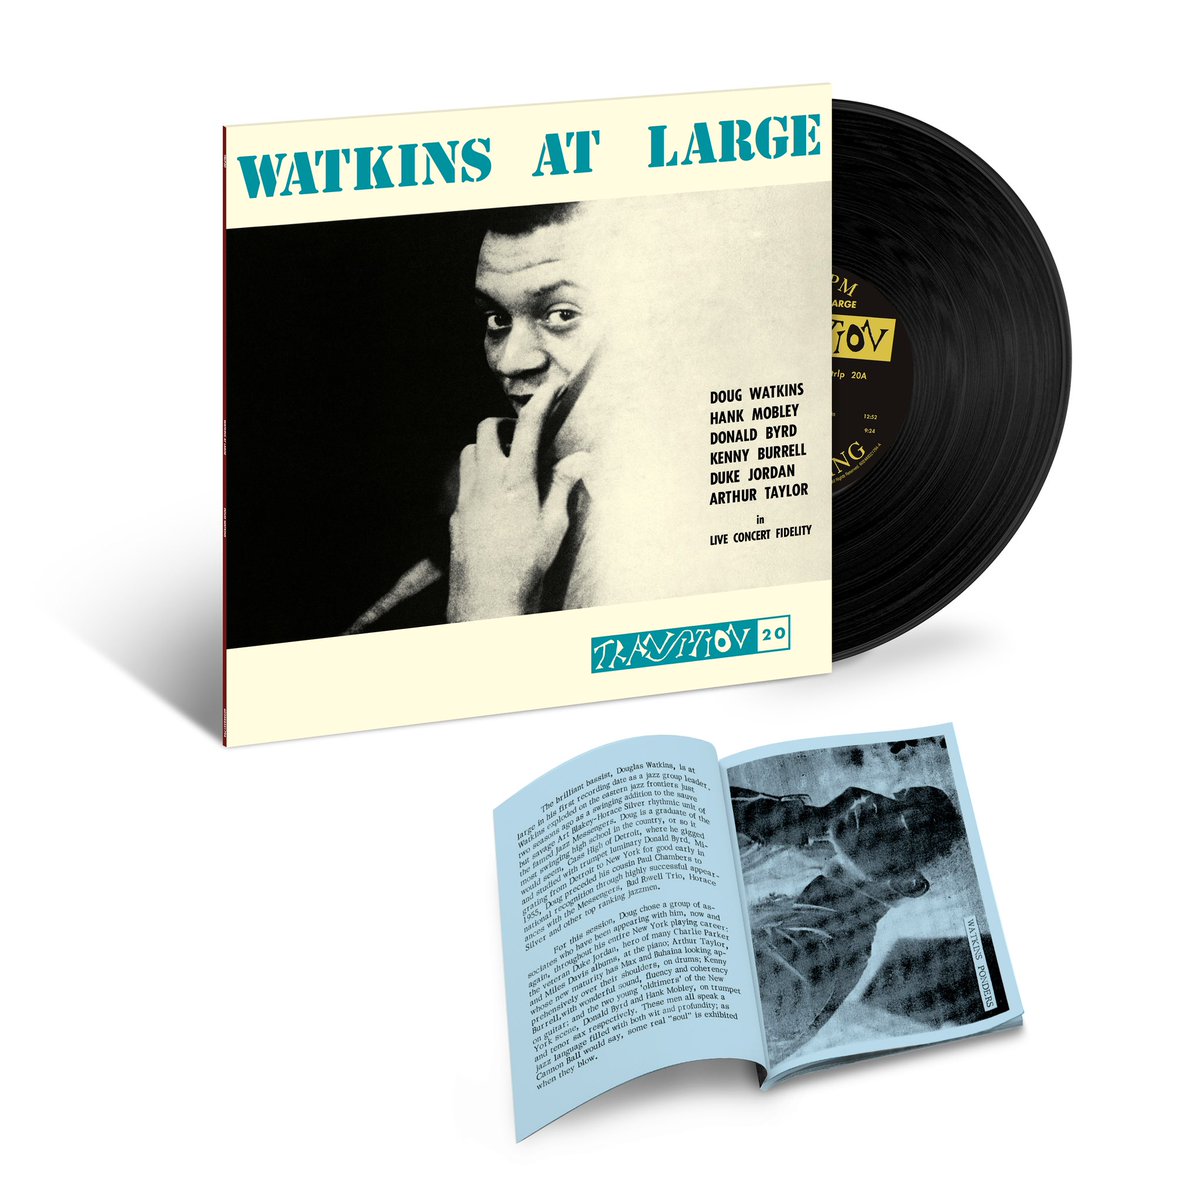 BLUE NOTE STORE BEST SELLER OF THE WEEK: Doug Watkins 'Watkins At Large' (Tone Poet Vinyl Edition) store.bluenote.com/collections/to…